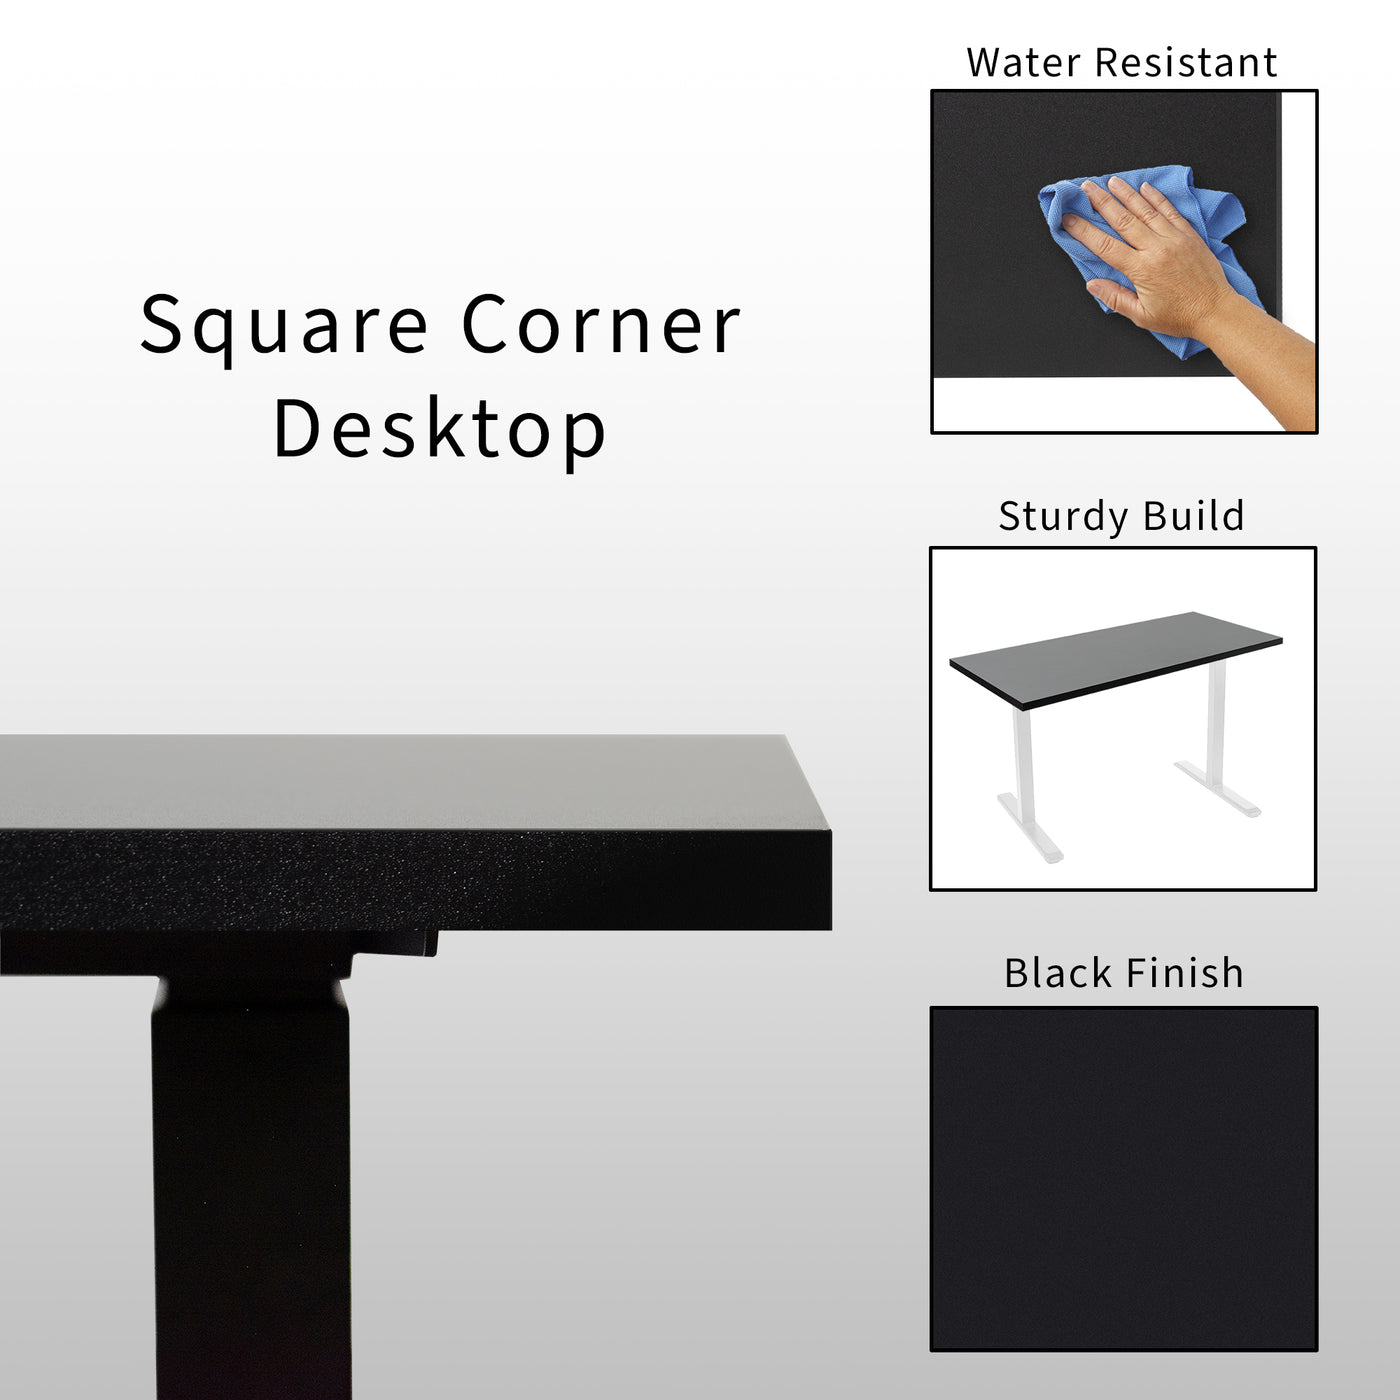  55 x 24 inch Universal Solid One-Piece Square Corner Table Top for Standard and Sit to Stand Height Adjustable Home and Office Desk Frames